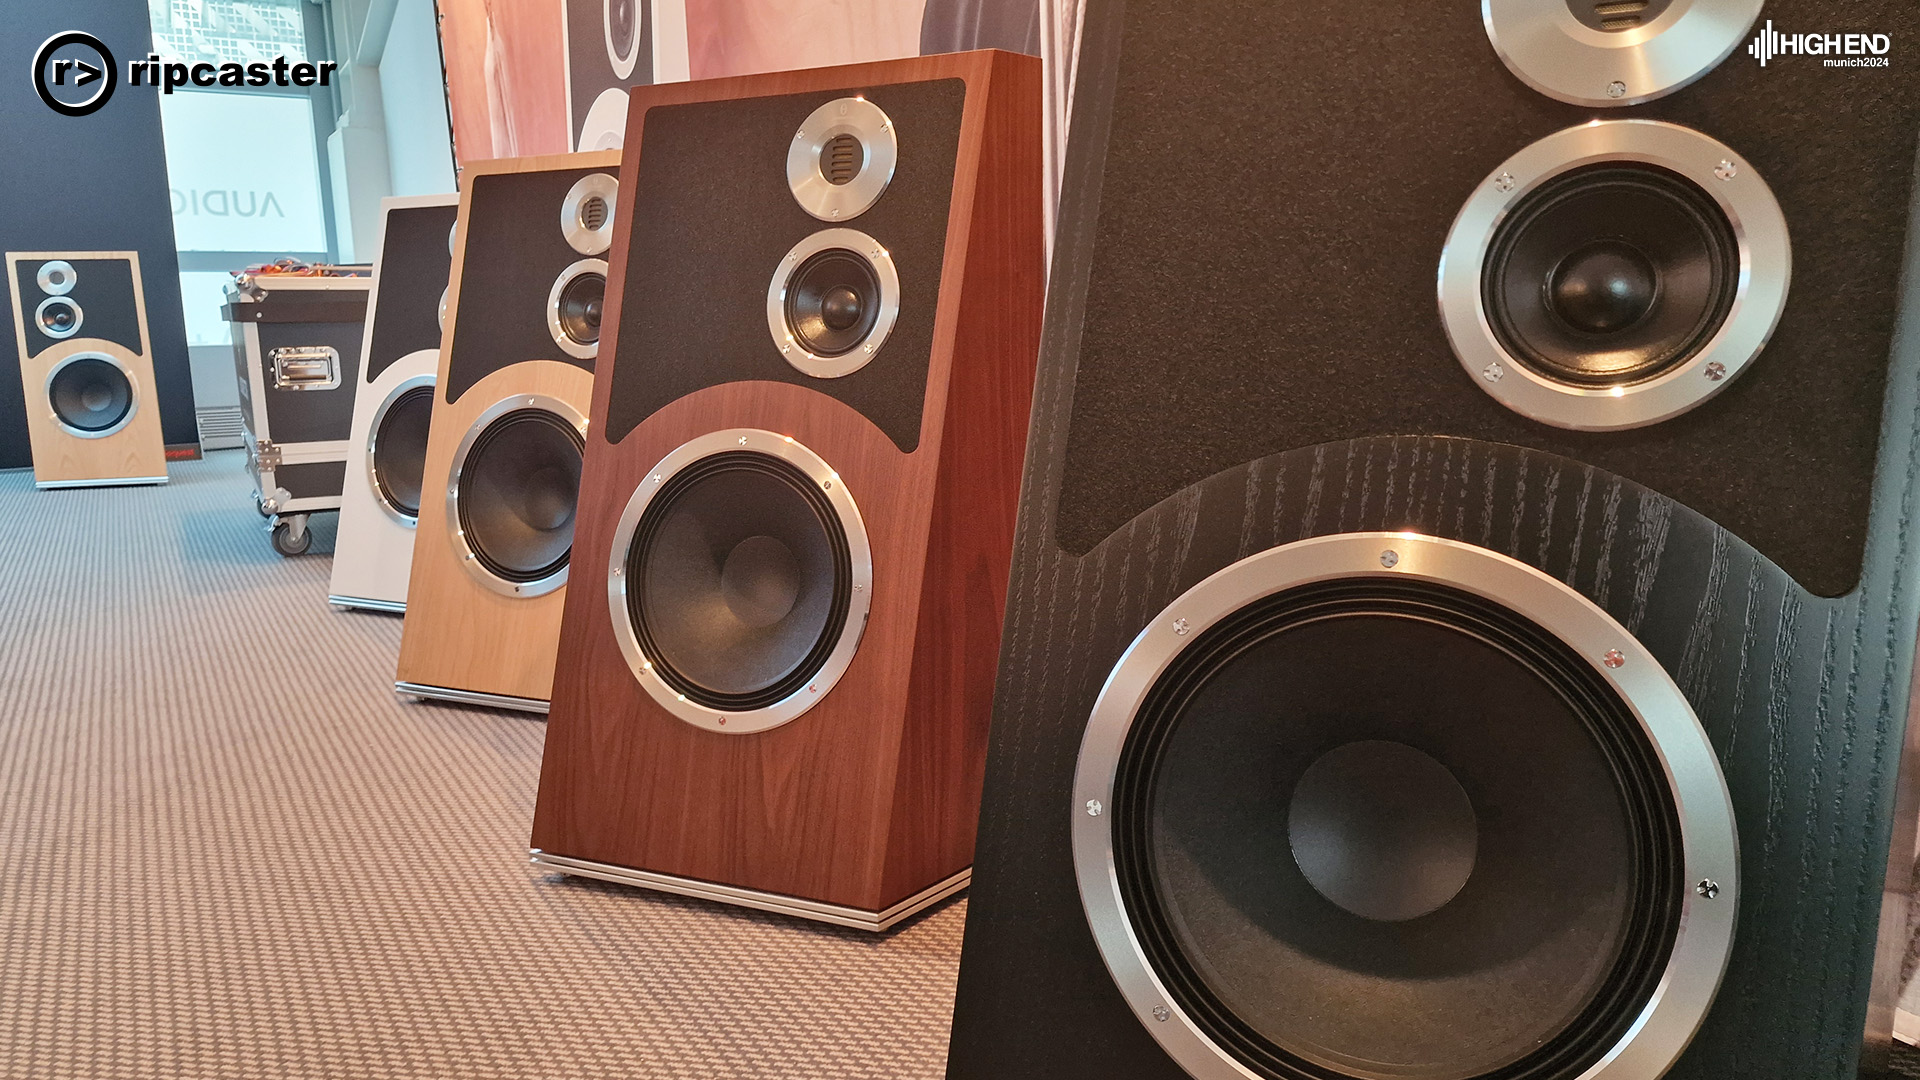 The new Audiovector Trapeze Ri loudspeakers in each of the finishes.